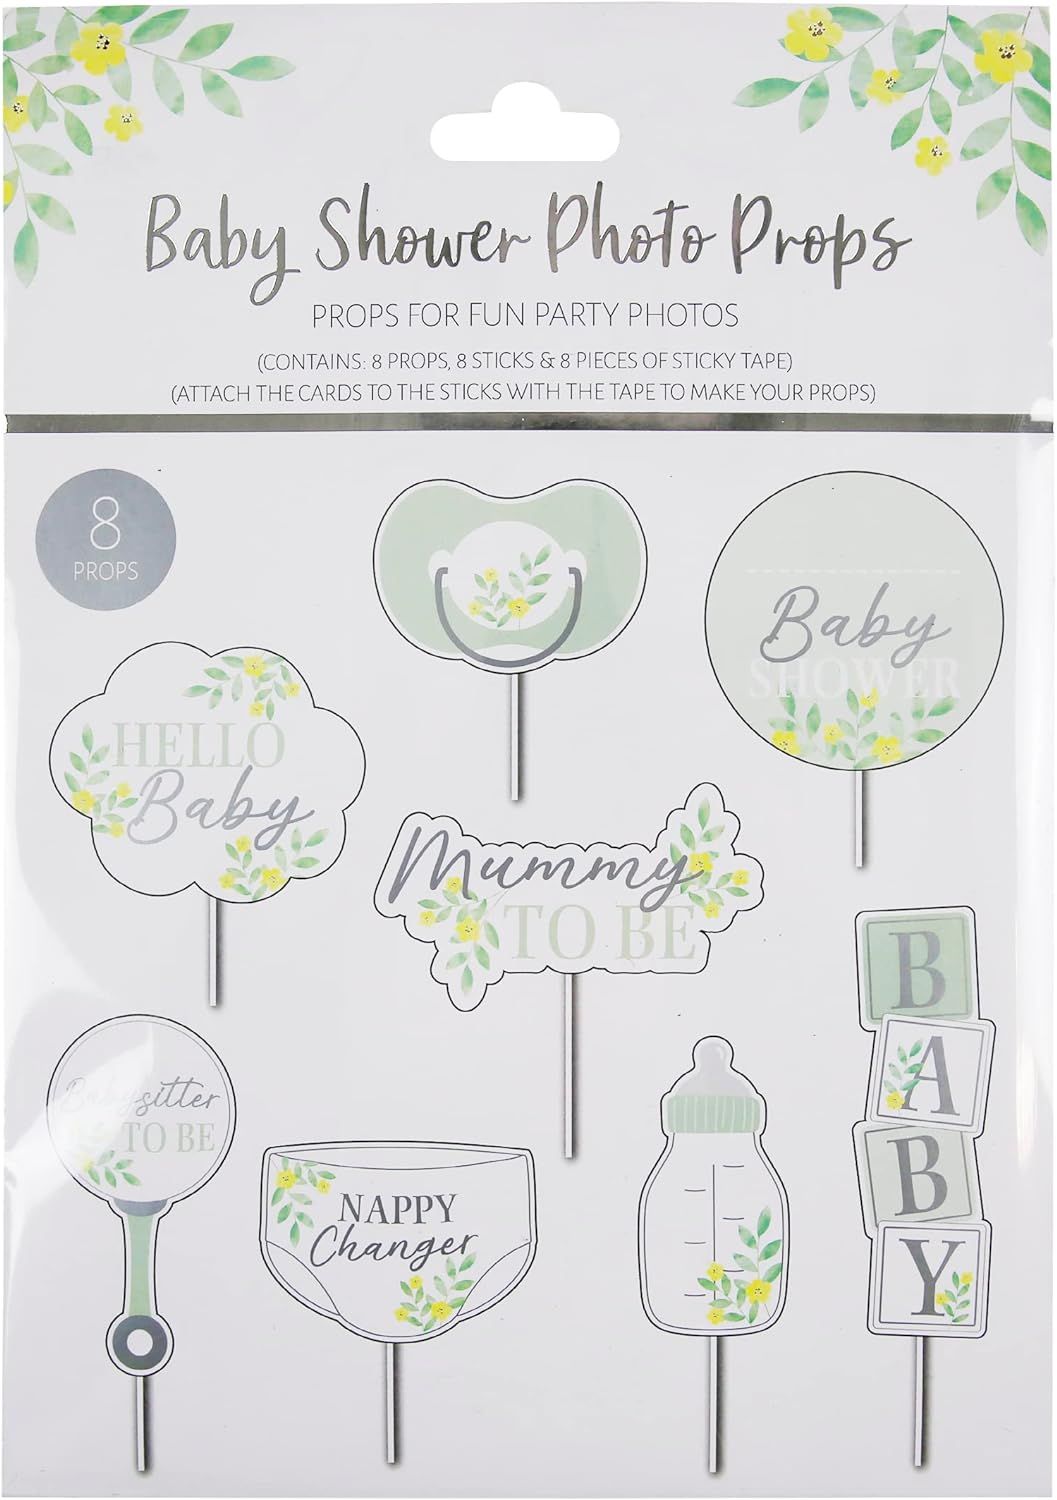 Baby Shower Photo Booth Party Props Pack of 8 Customizable With A to Z Stickers | Merthyr Tydfil | Why Not Shop Online